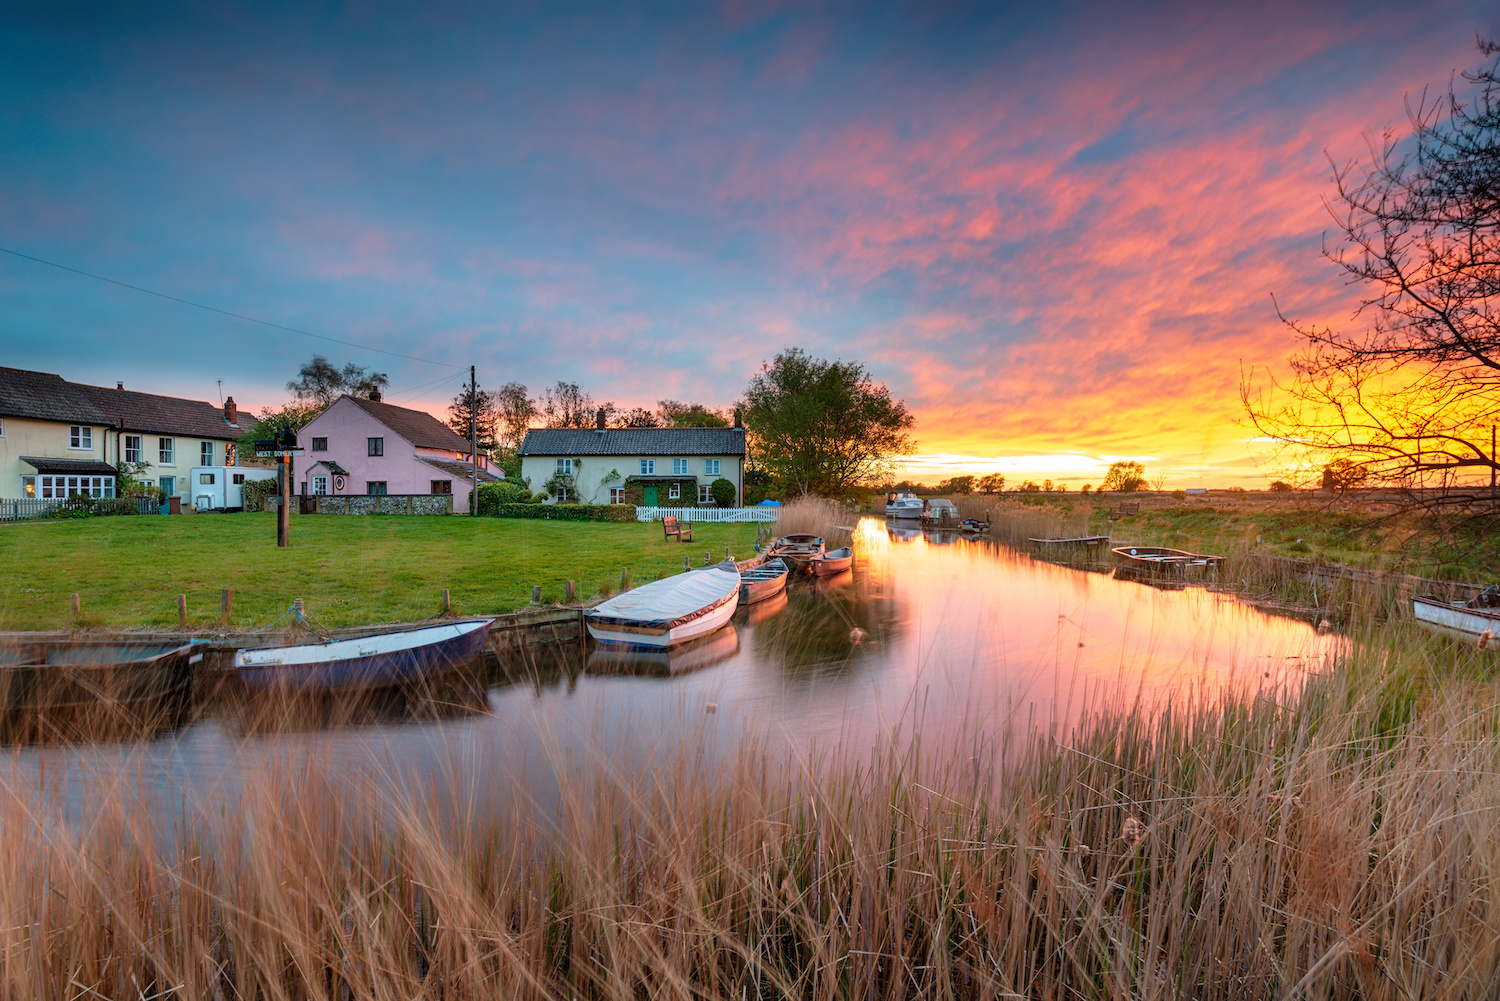 The sun sets in hues of pink and orange over a river running through a small village, with rowboats moored to the bank.